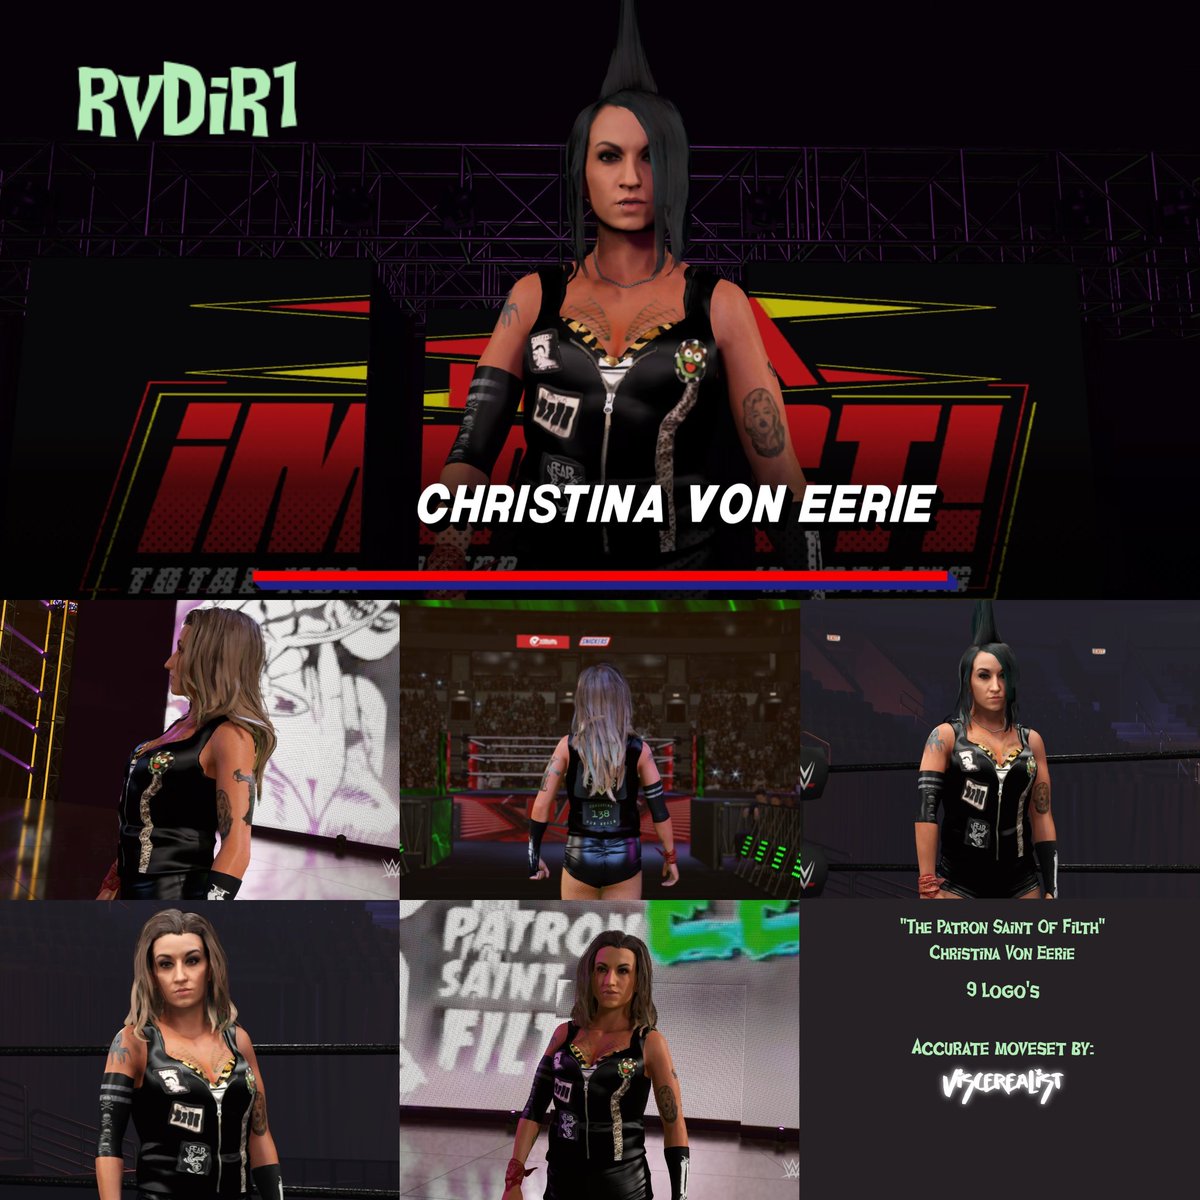 'The Patron Saint Of Filth' Christina Von Eerie Now up on CC! 9 Logo's used Accurate moveset by the amazing @Viscerealist @Randaum_ Uploaded a gorgeous render for her. Titantron will be uploaded seperately. @WWEgames @CVEvil_138 #WWE2K4 #RvDiR1 #ChristinaVonEerie